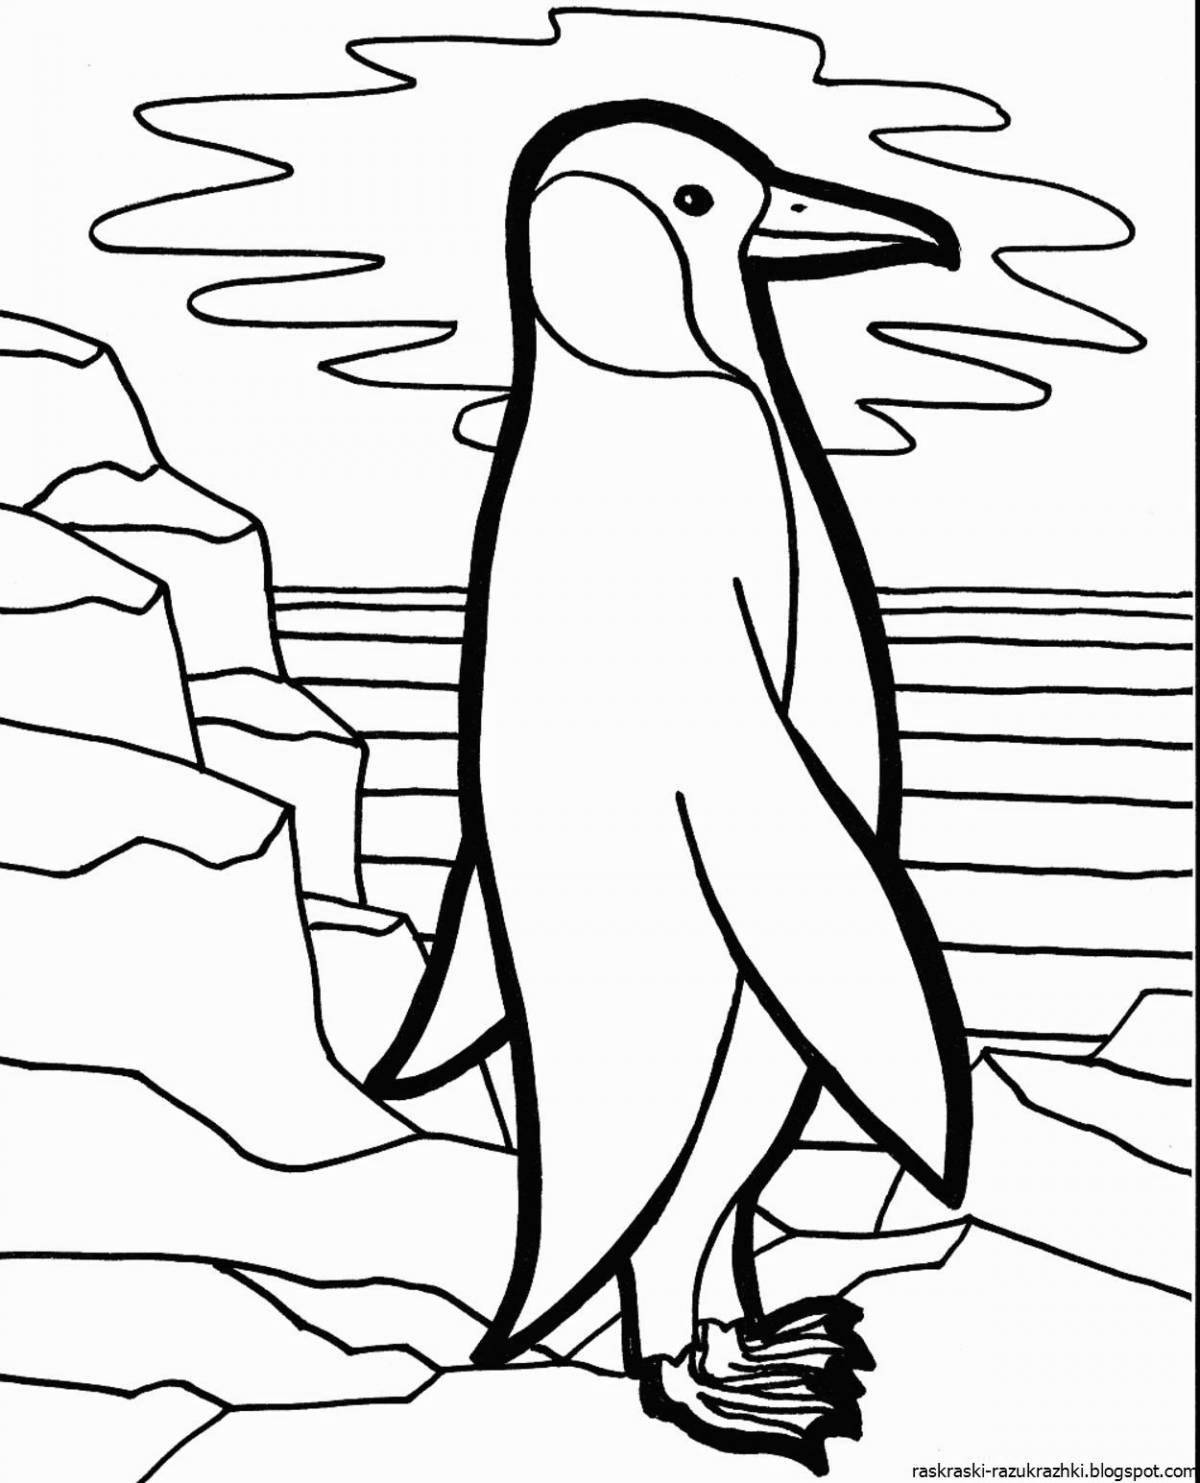 Attractive penguin drawing for kids